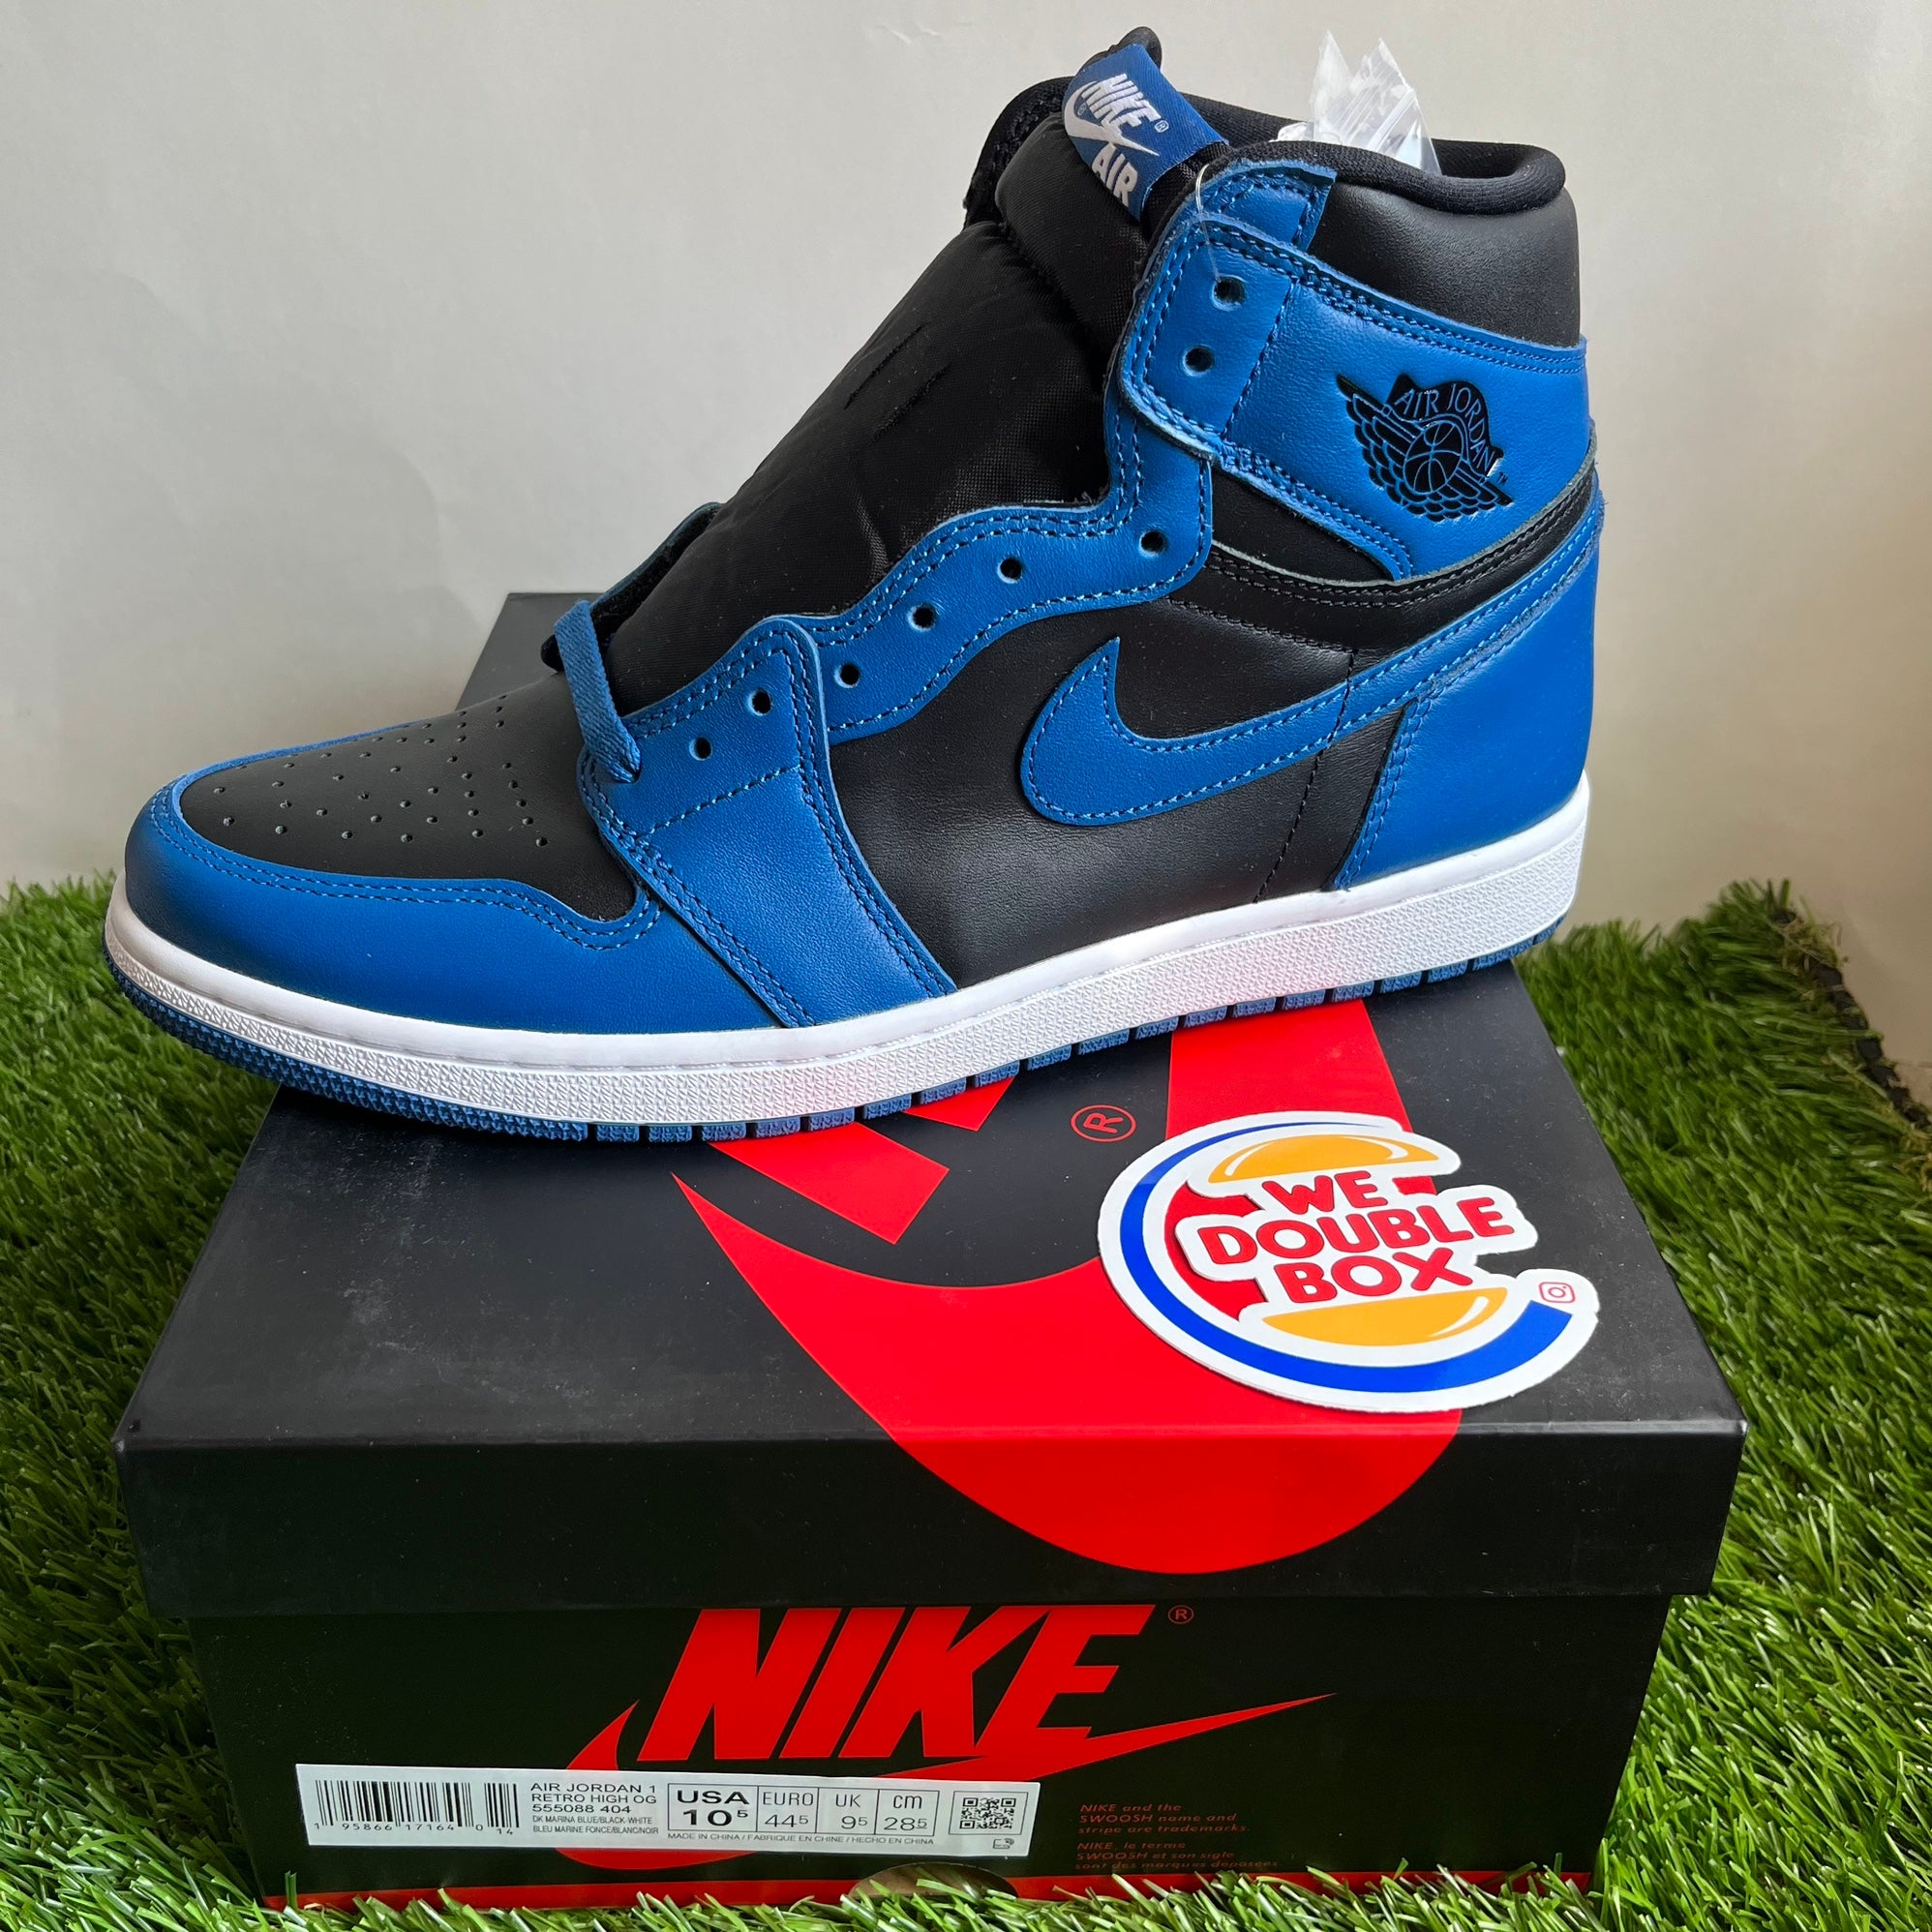 Nike Air Jordan 1 Marina Blue Size .5 Shoes Mens Sneakers Jumpman  New  Adult Ds Deadstock Laces